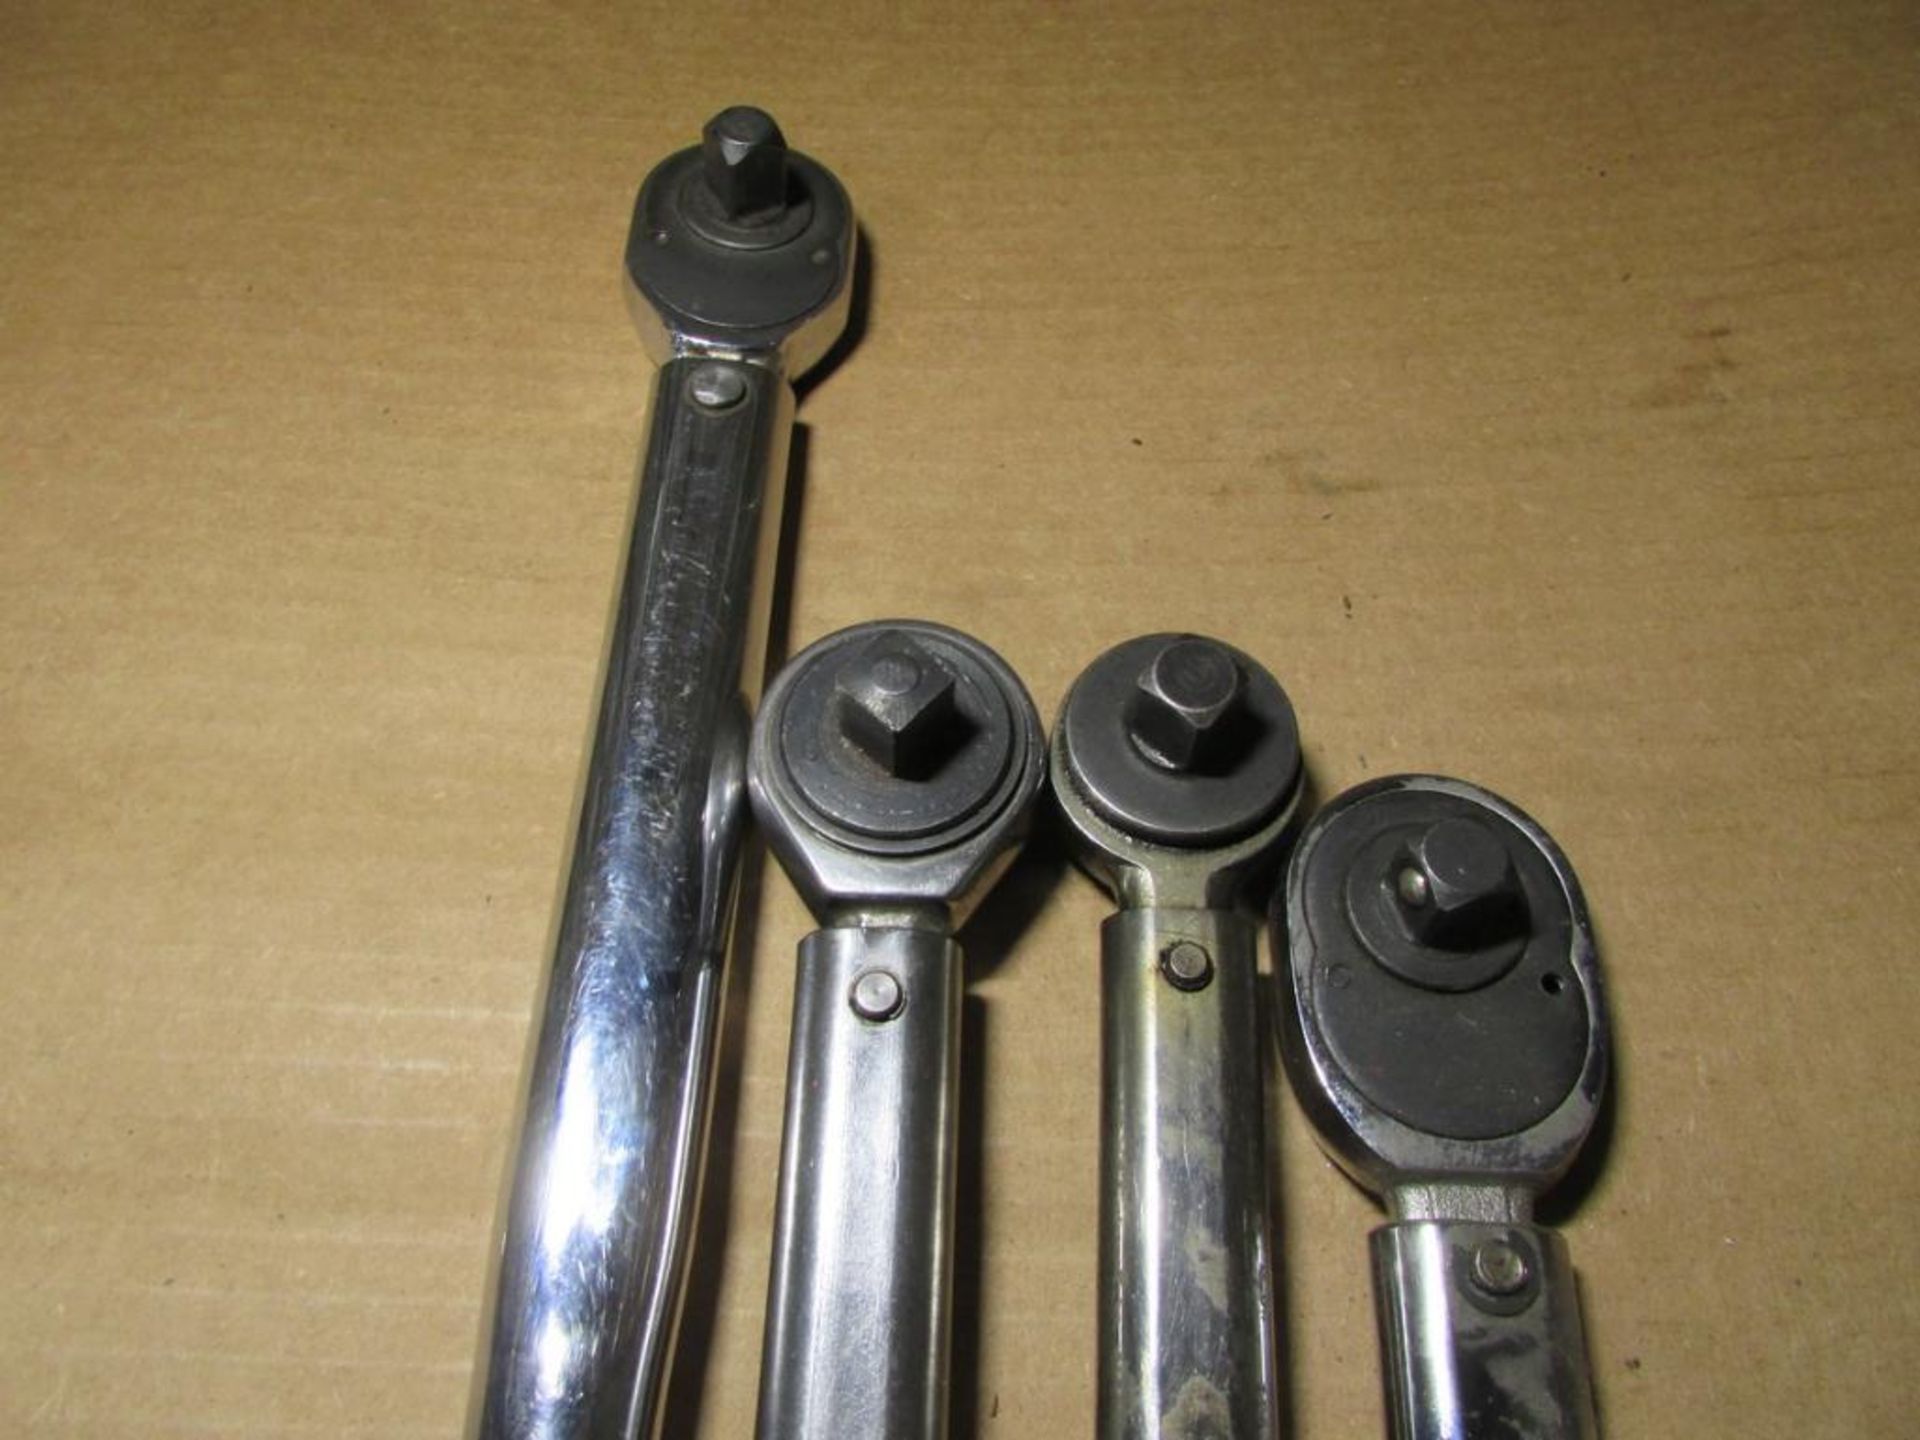 Assorted Torque Wrenches: (1) Proto6014, (1) Utica TCI-250FRN, (1) Armstrong 64-102, (1) Q.Lok 150FT - Bild 2 aus 3